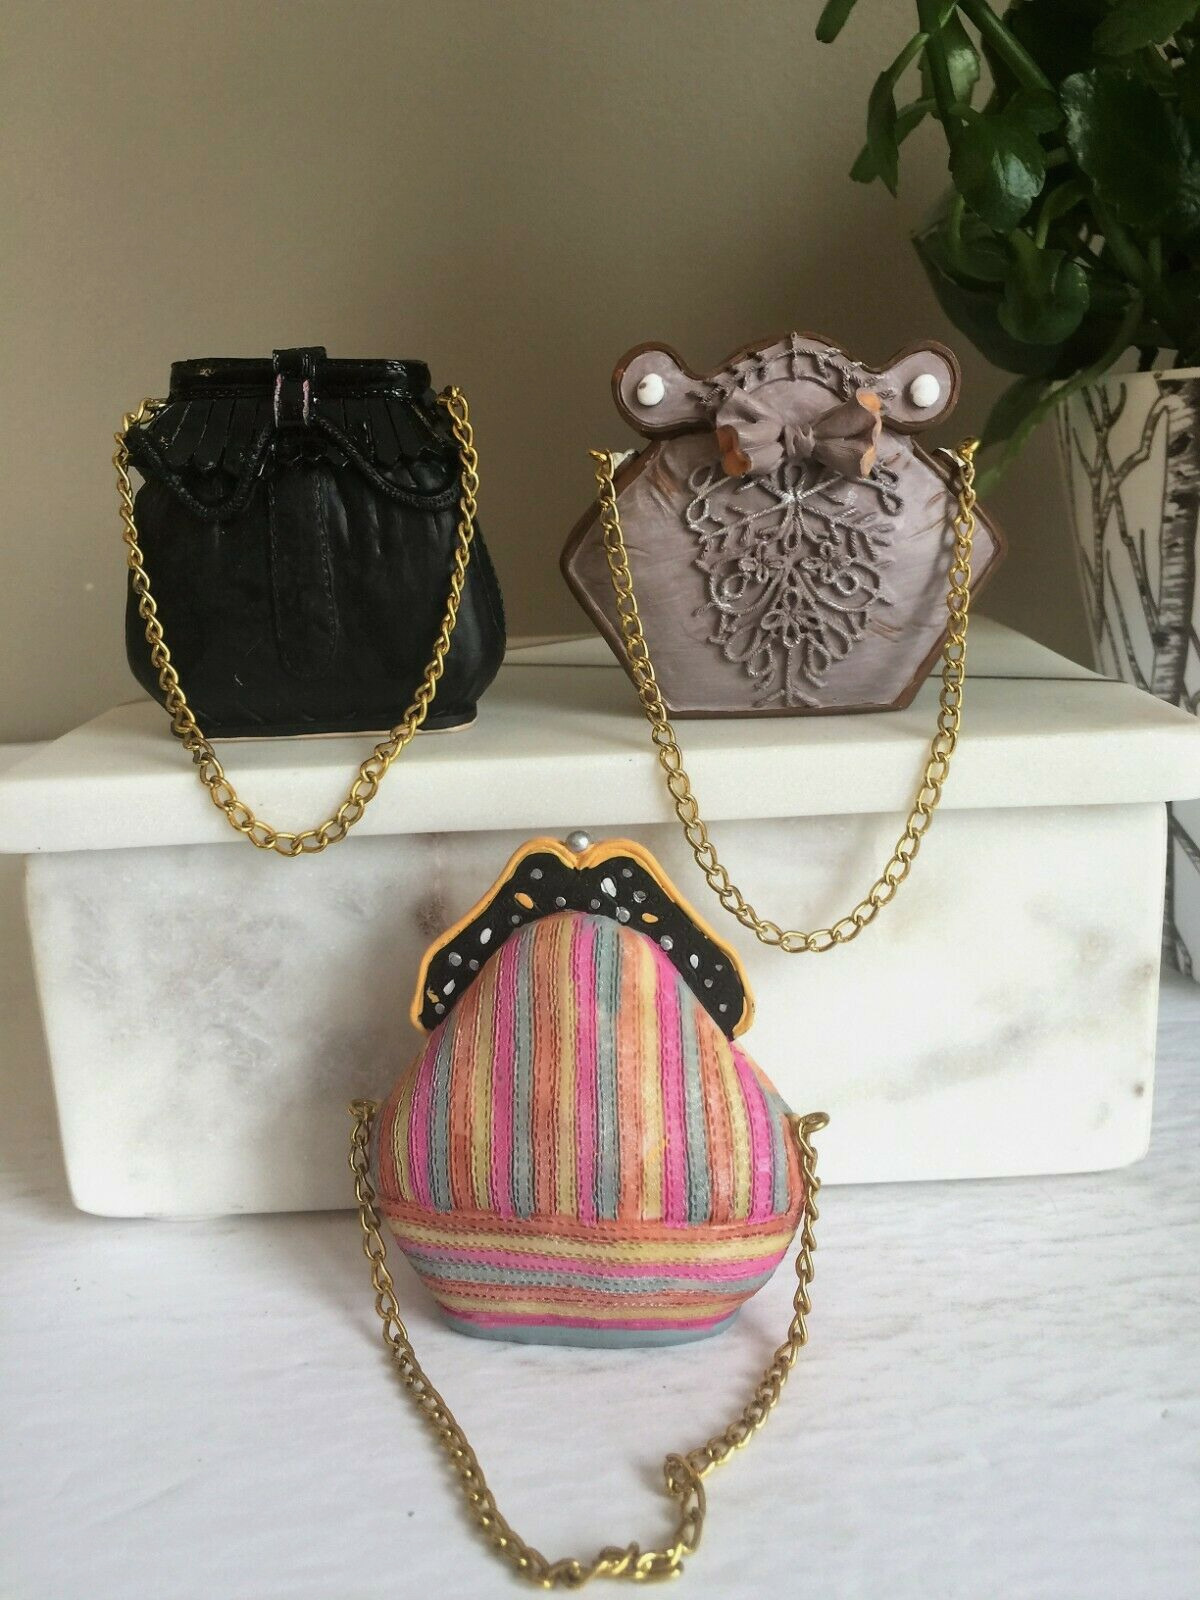 Collectible Mini Purse Set of Three Resin Purses Assortment 2.5 in Gift